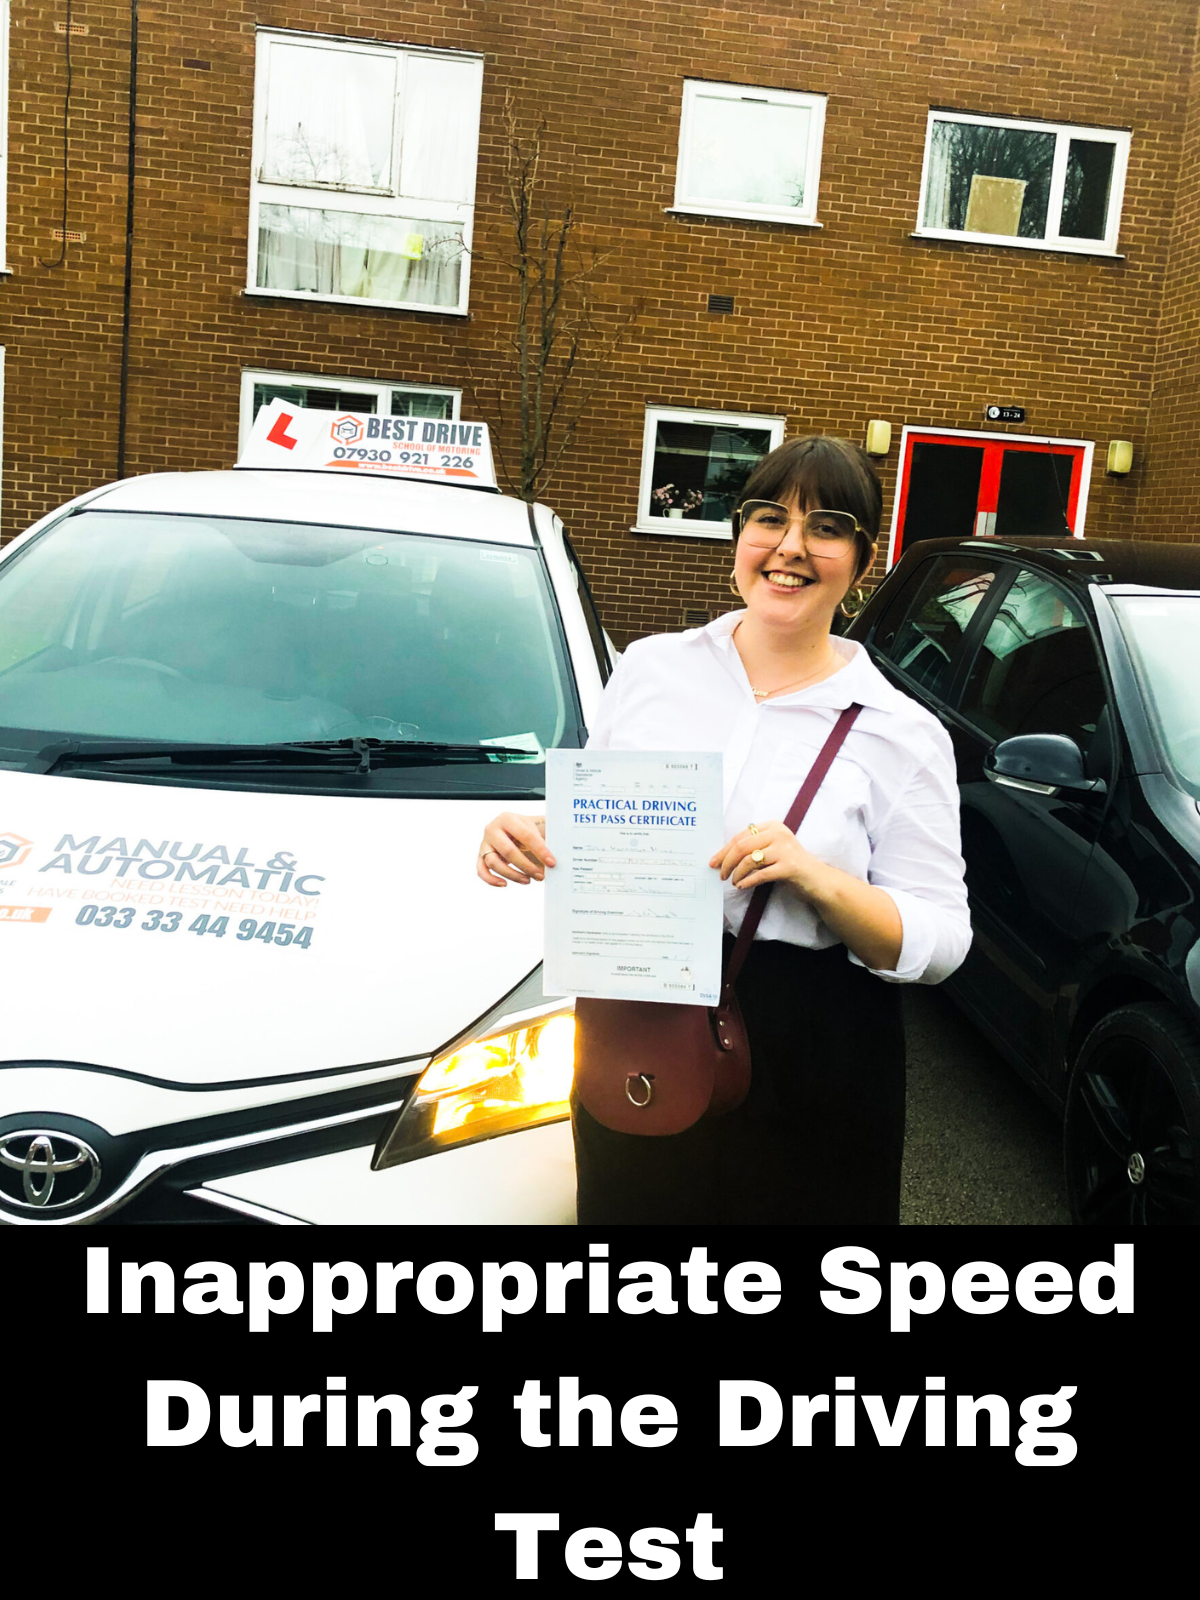 Inappropriate Speed During the Driving Test